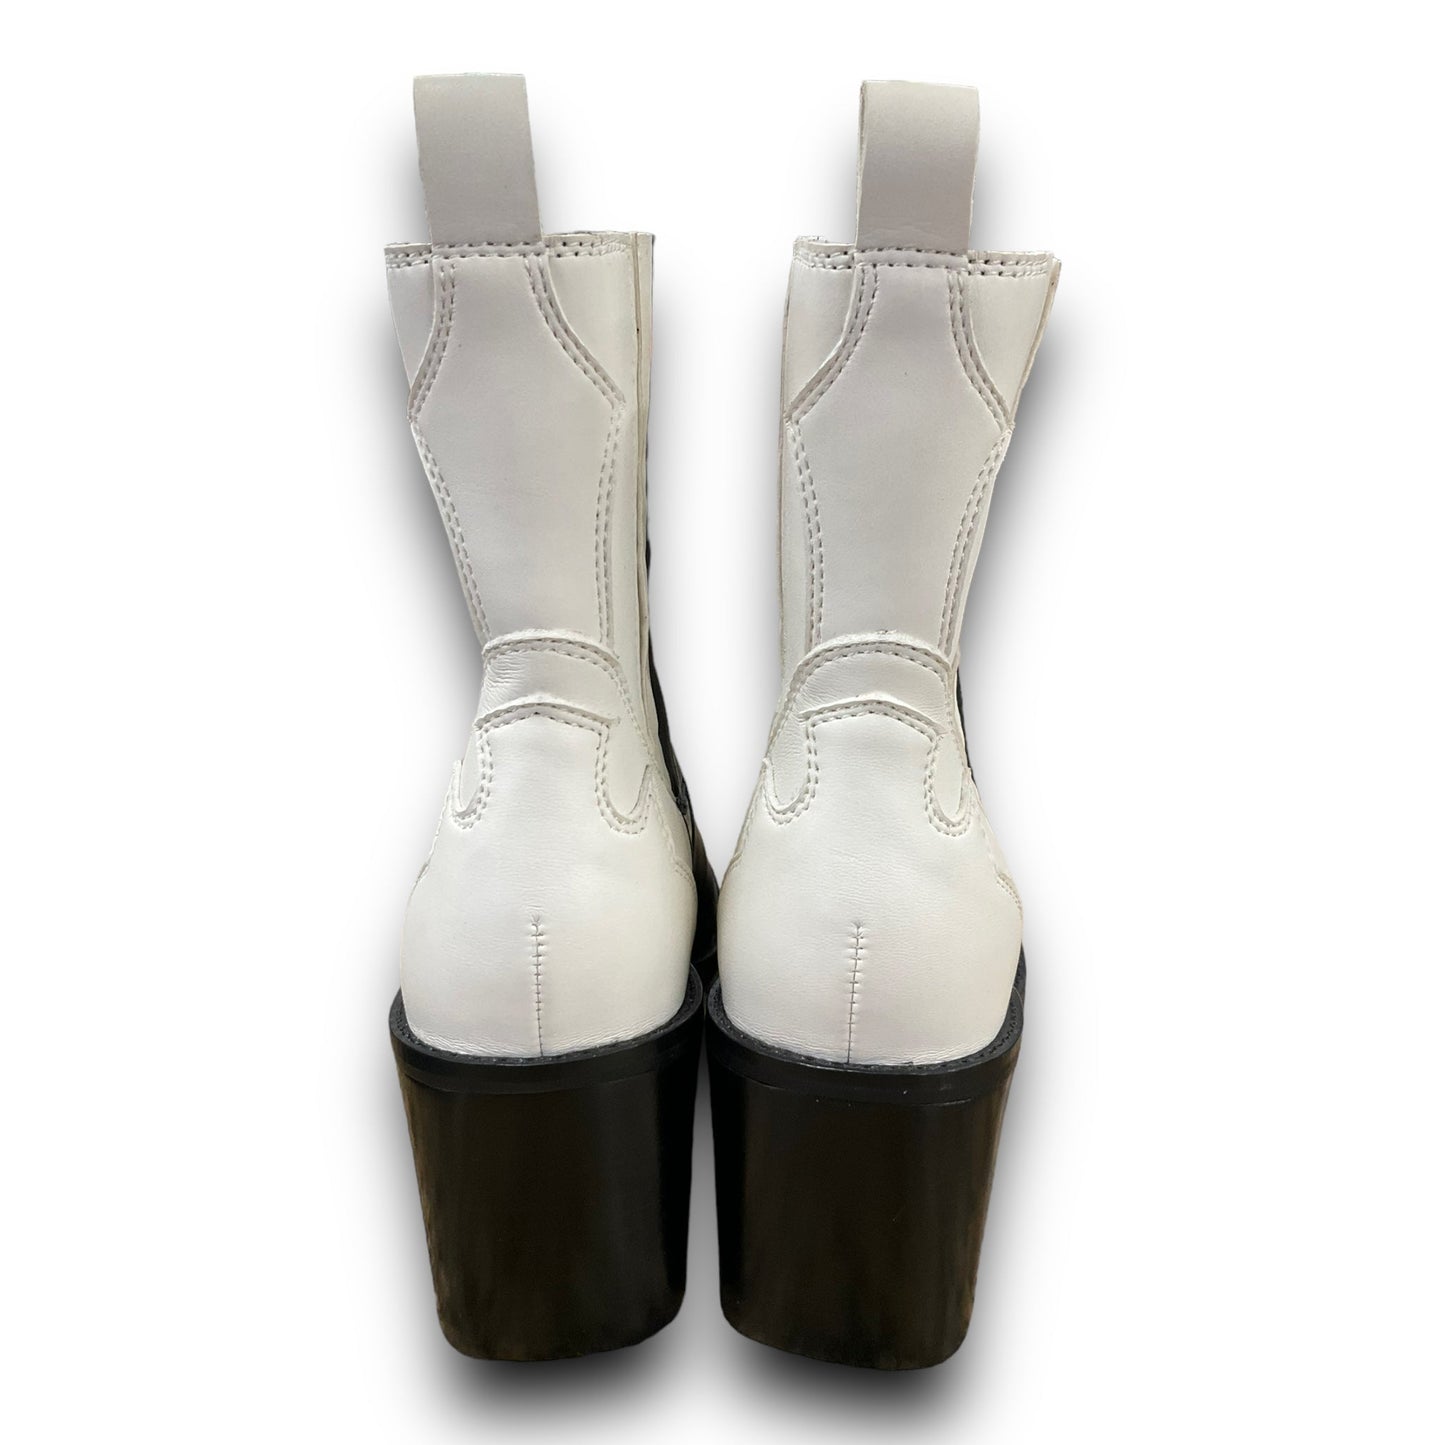 Black & White Boots Ankle Heels Dolce Vita, Size 7